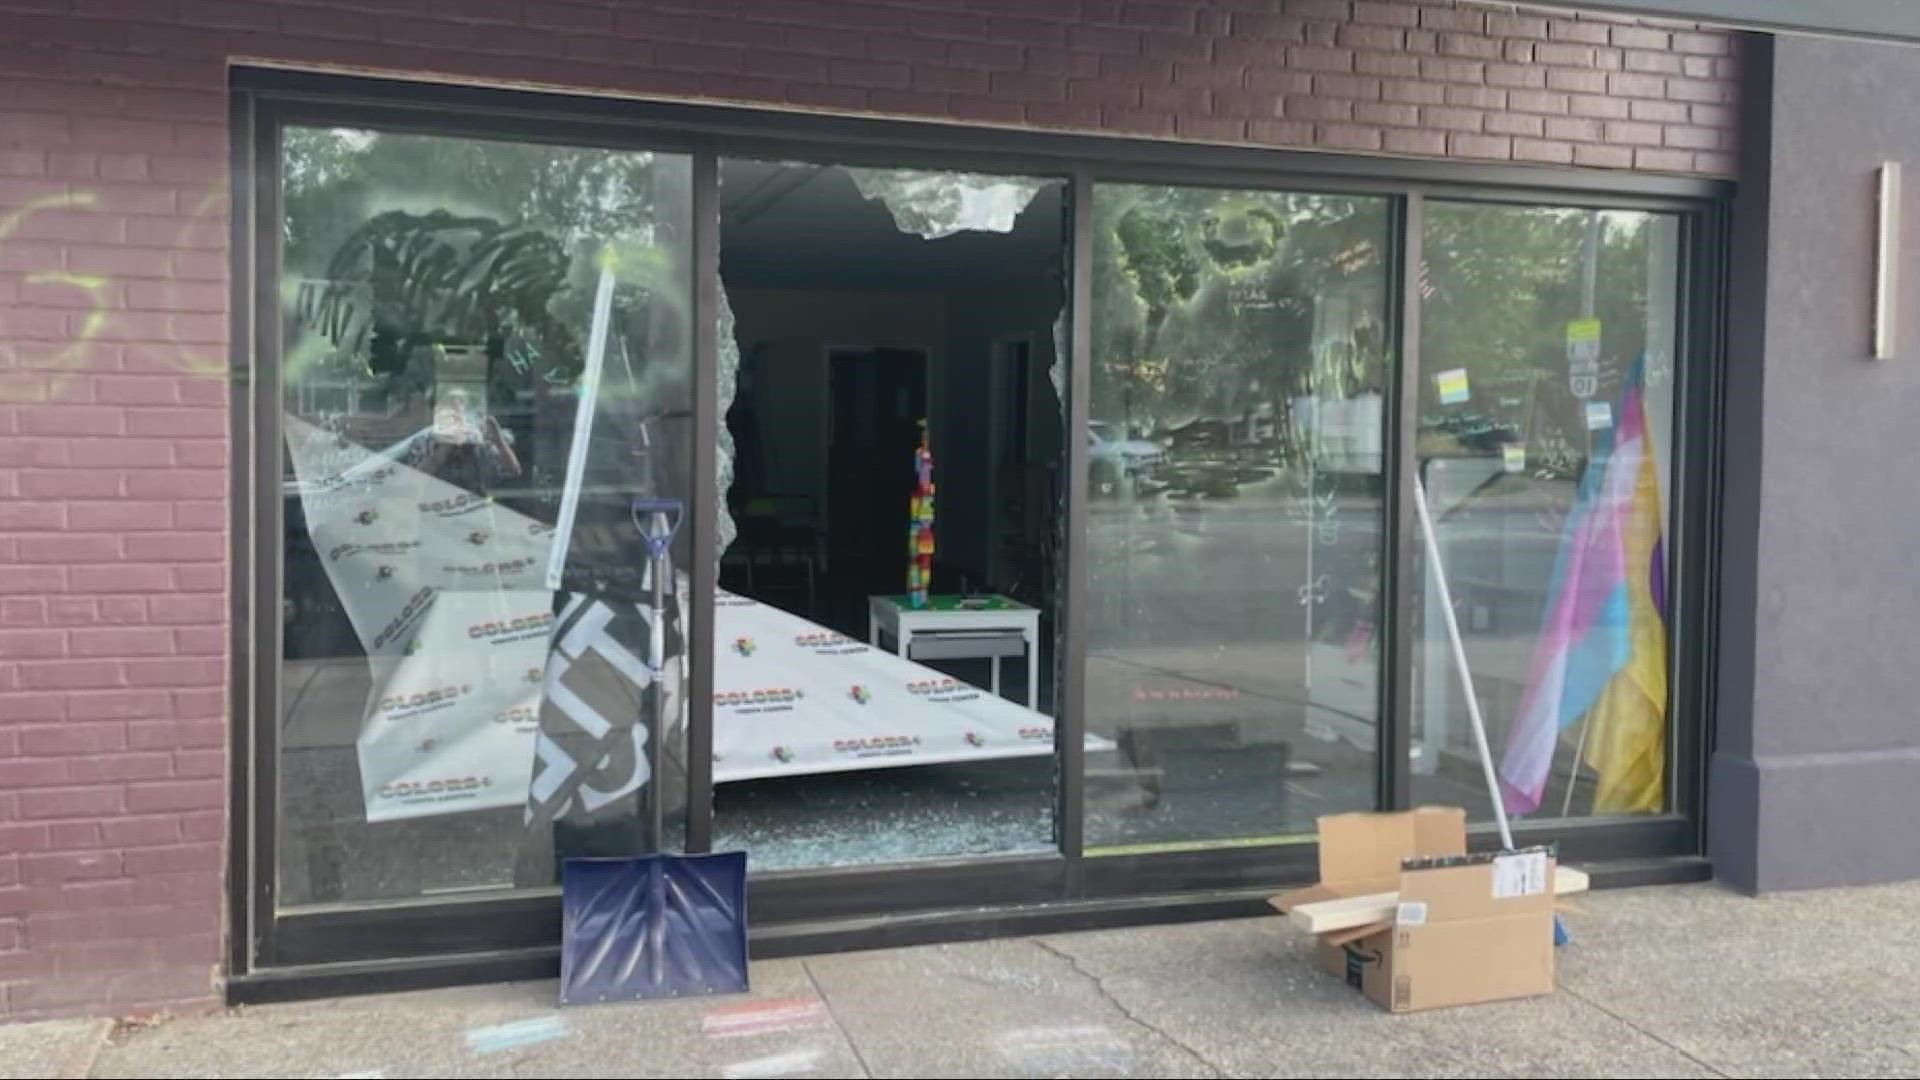 Founders shared images with 3News of the damage at Colors+ Youth Center.